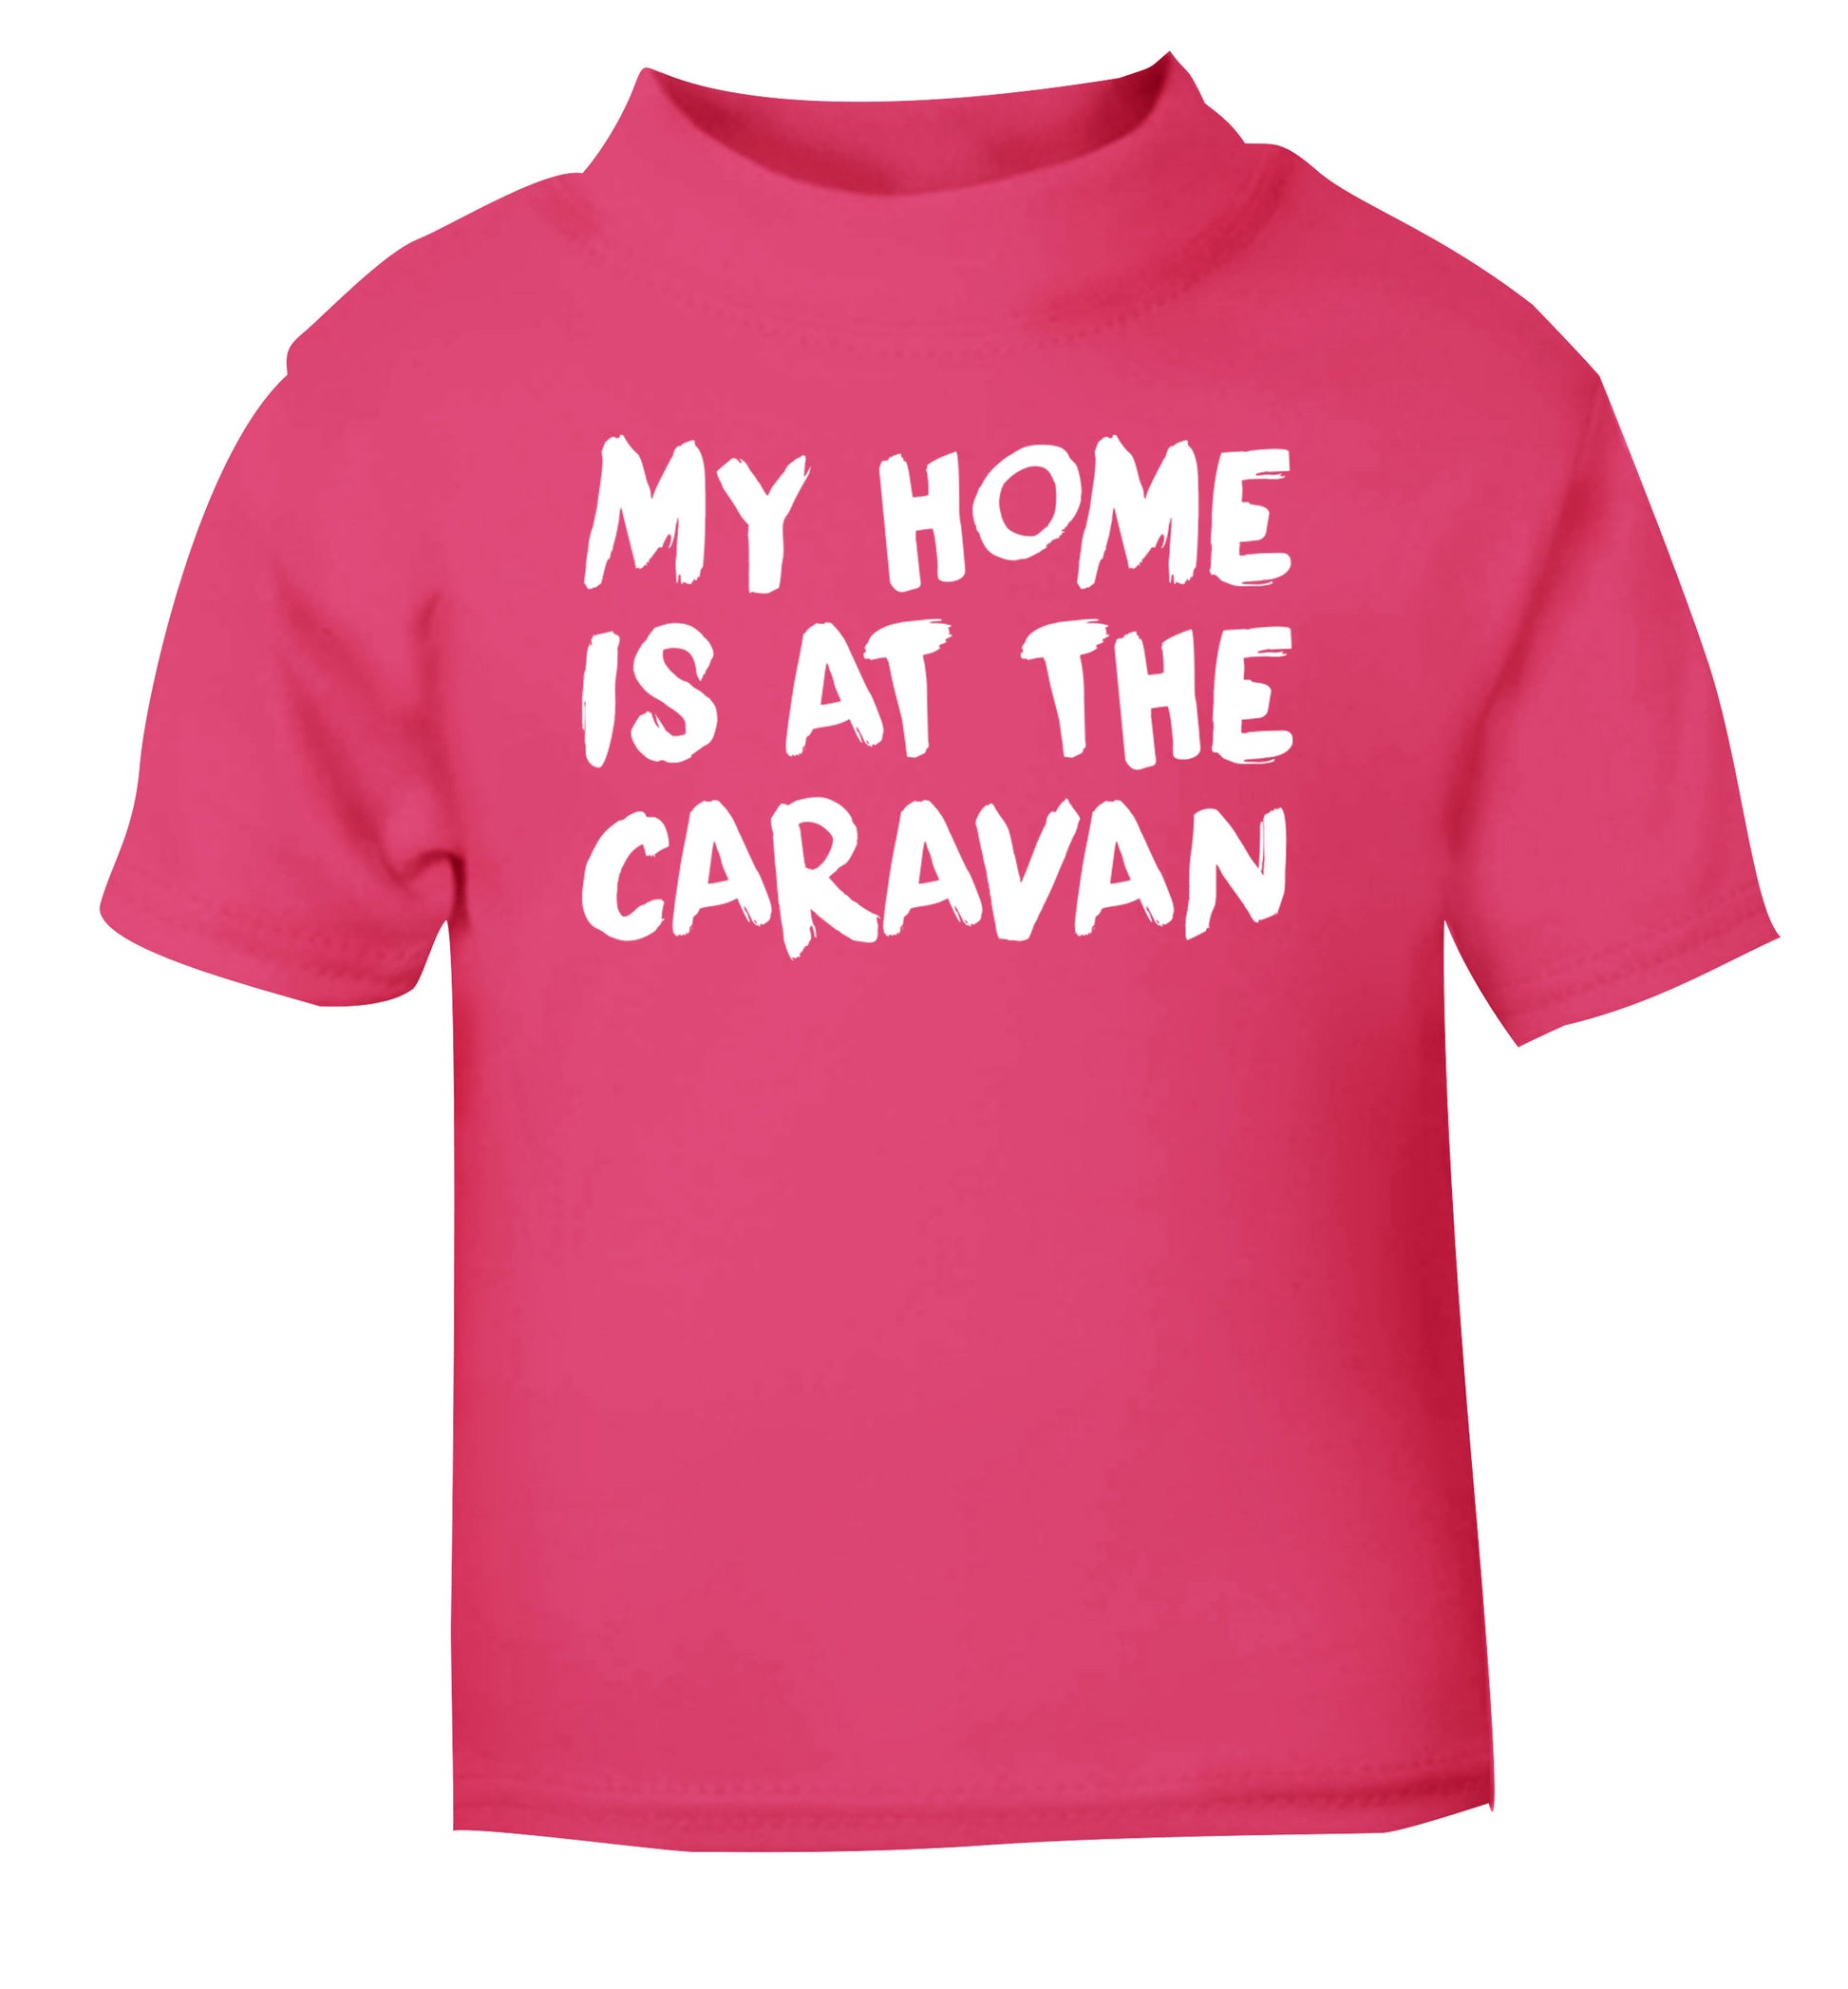 My home is at the caravan pink Baby Toddler Tshirt 2 Years